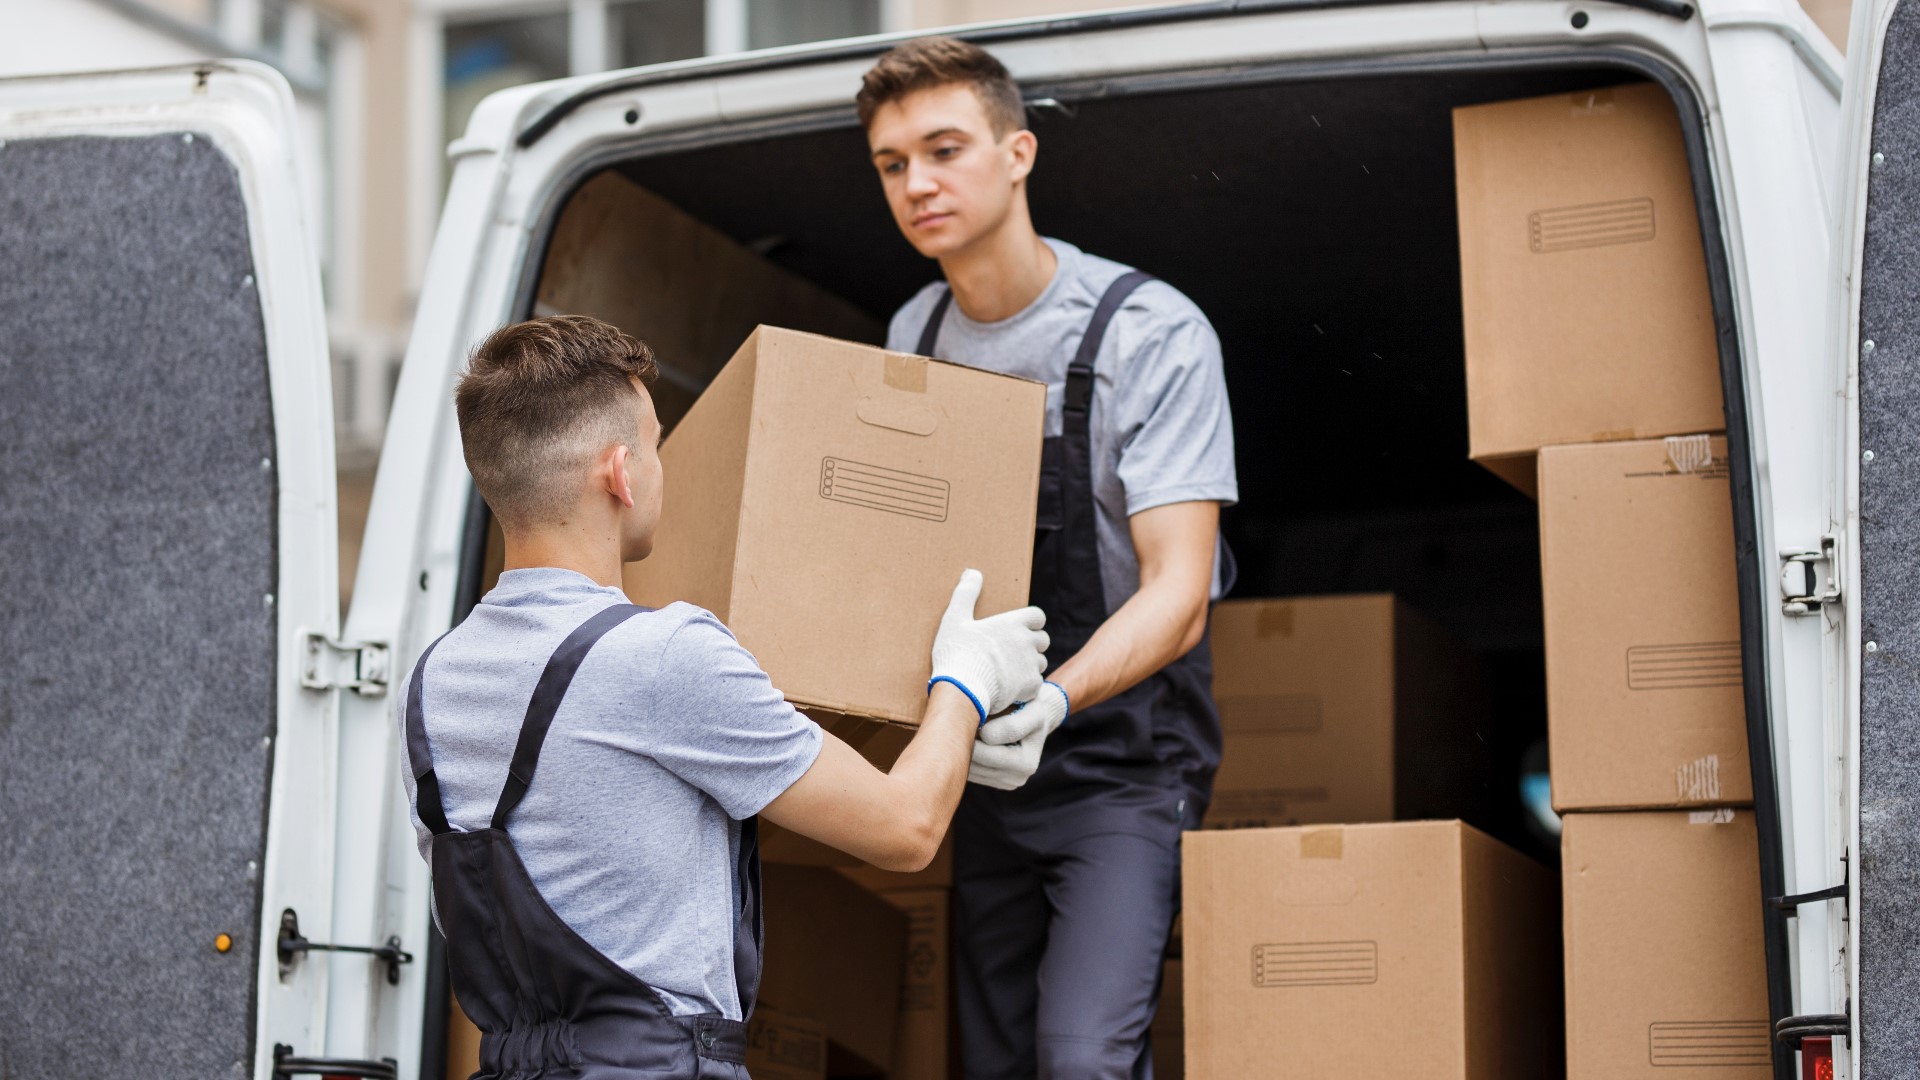 One of the many professional moving companies in desperate need of truck drivers is offering extensive benefits plus a $100,000 salary for long-distance drivers.